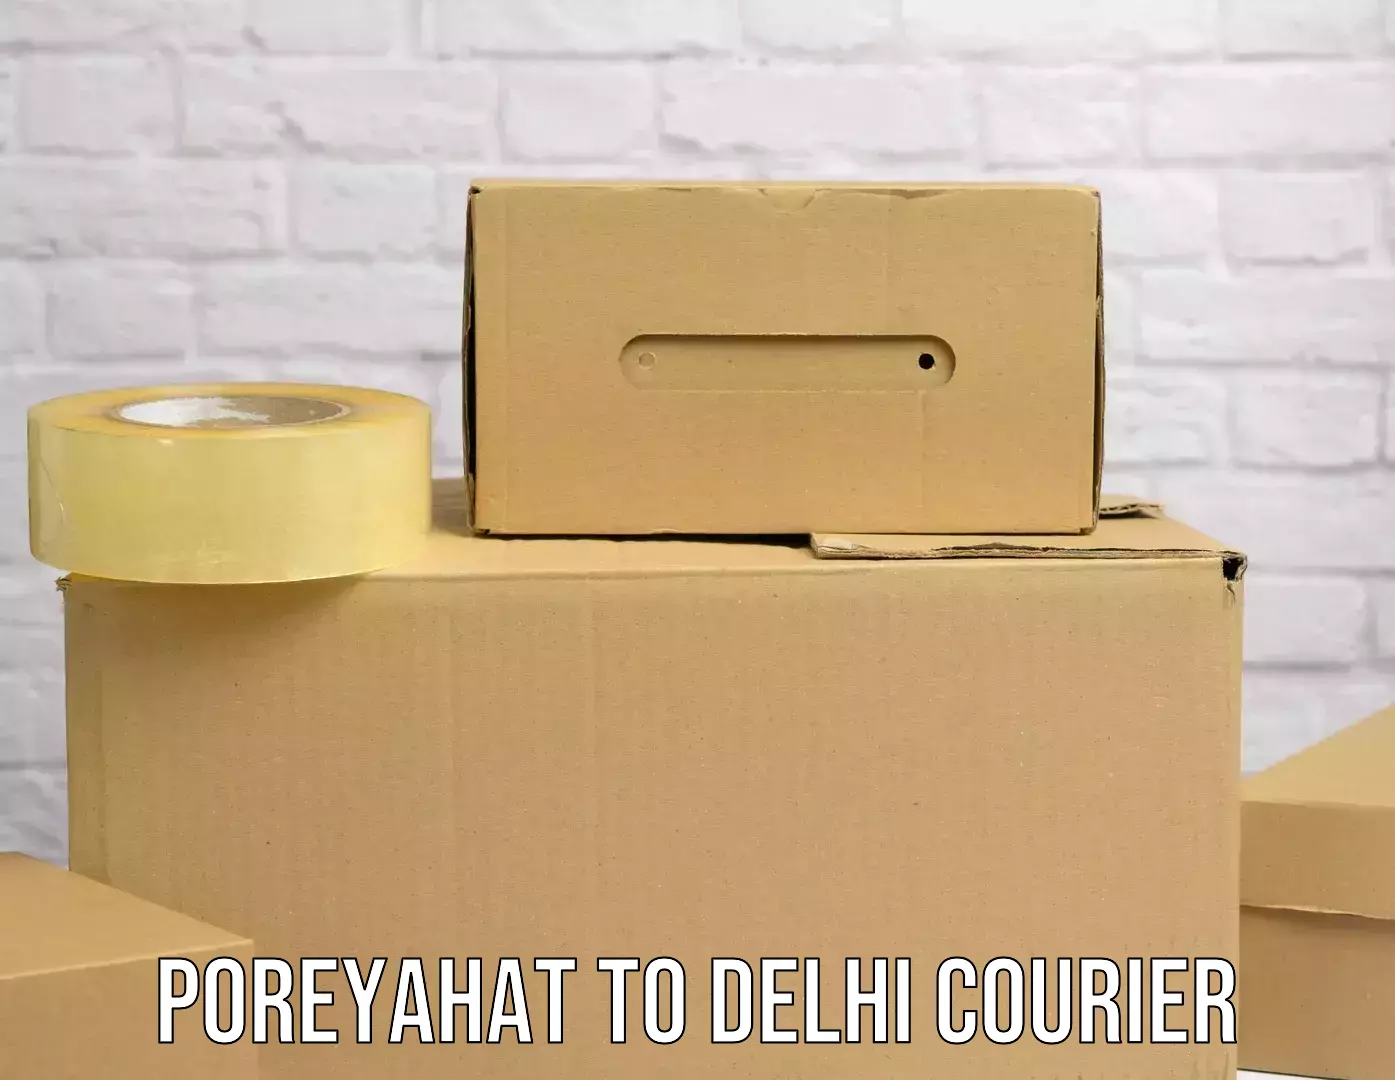 Enhanced tracking features Poreyahat to NCR